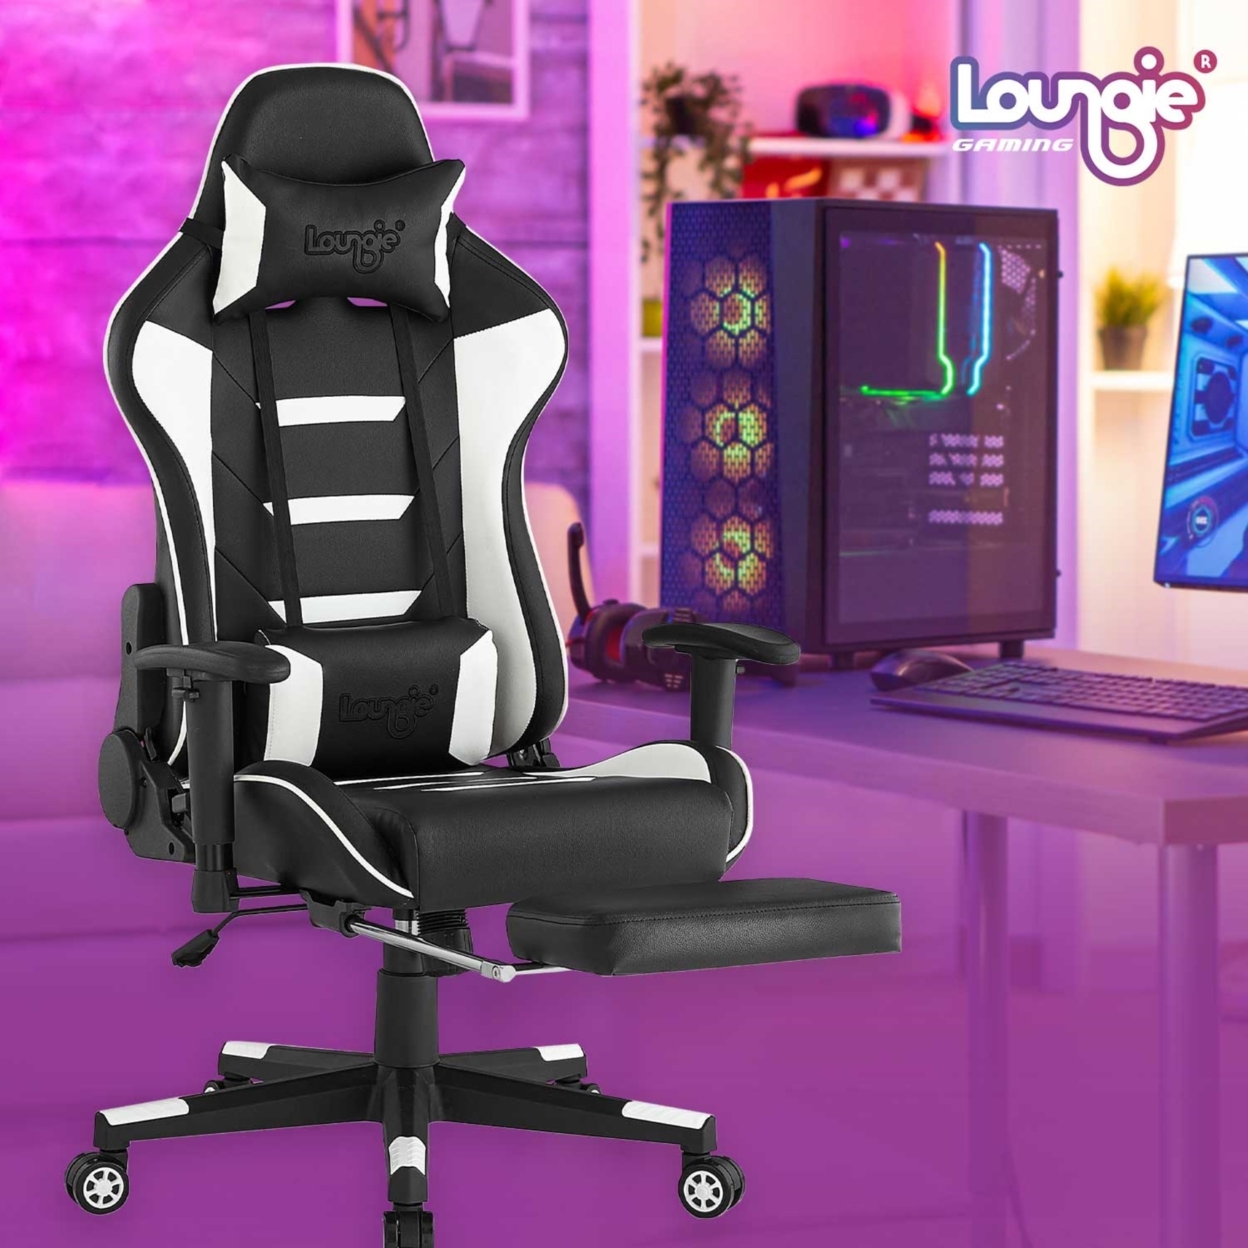 Benito Game Chair-Swivel, Adjustable Back Angle, Seat Height and Armrest-360 Degree Rotation-Neck Support, Lumbar Massage Cushion - white